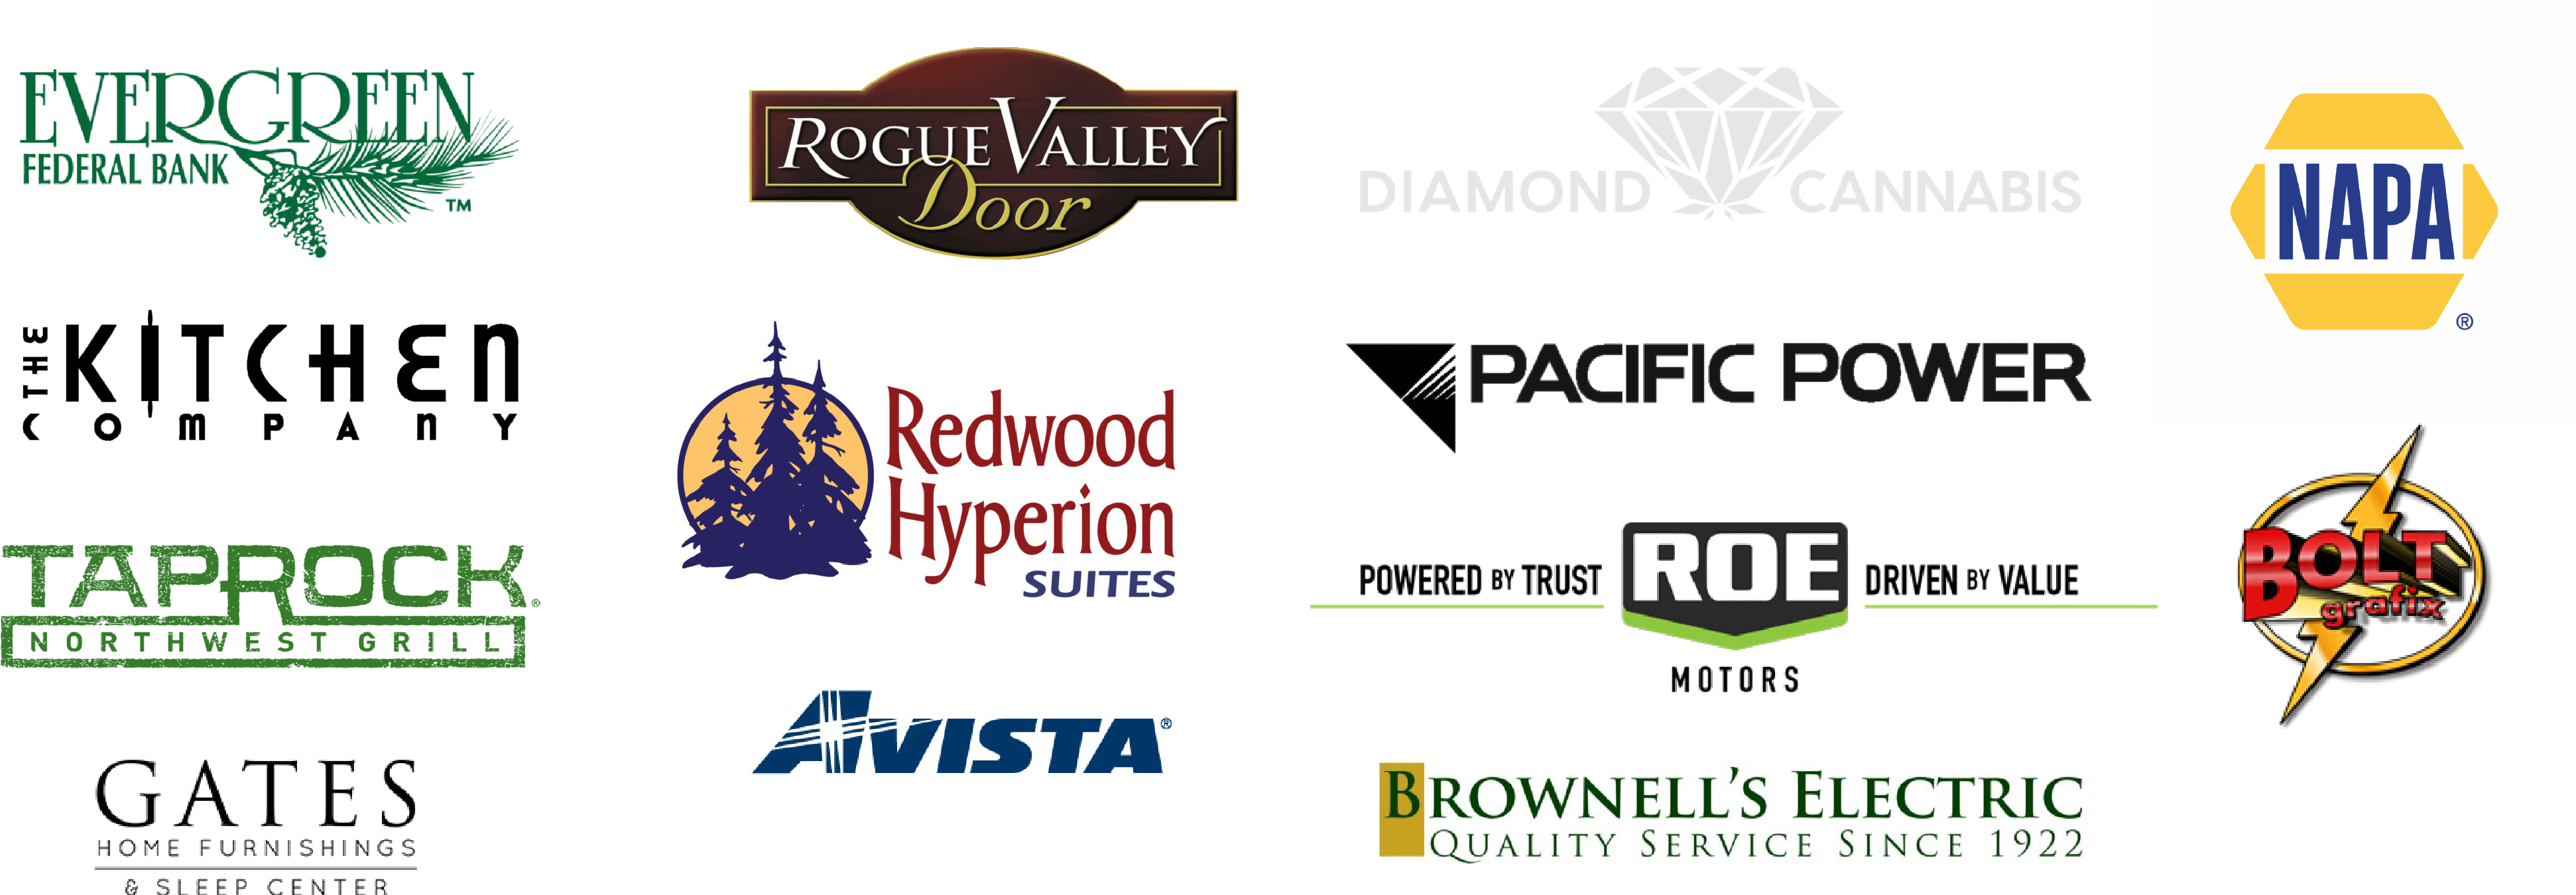 Evergreen Bank, Rogue Valley Door, Diamond Cannabis, NAPA, Pacific Power, ROE Motors, Bolt Grafix, Brownell's Electric, Avista, Redwood Hyperion Suits, Kitchen Company, Taprock, Gates Home Furnishing